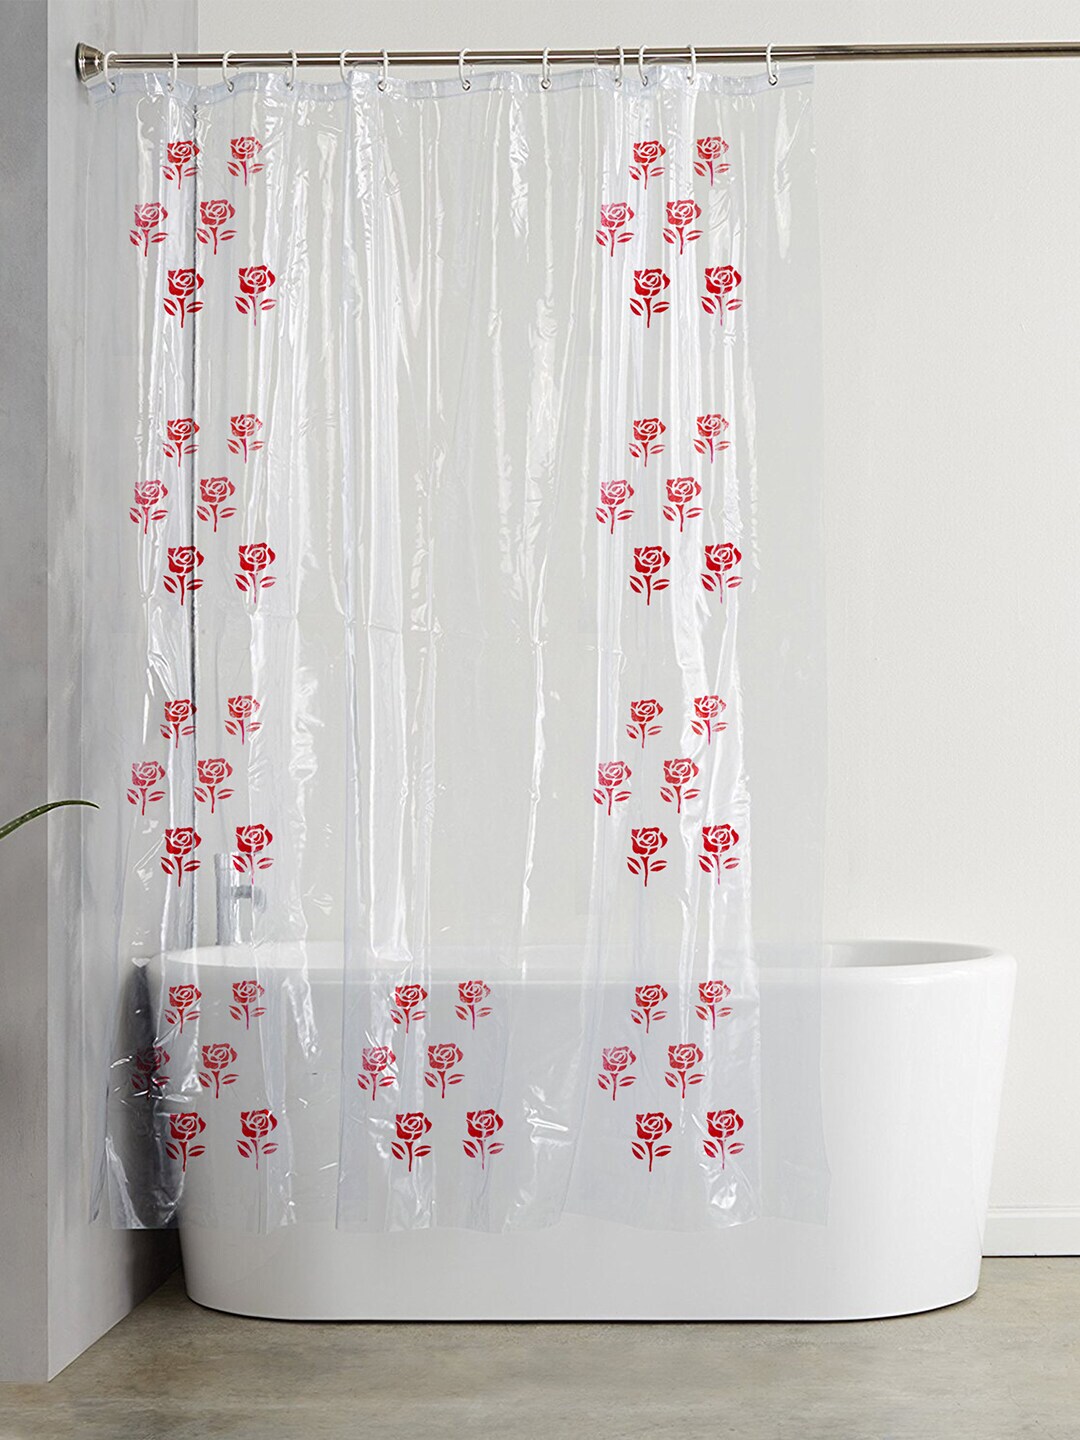 Kuber Industries Transparent Printed Shower Curtains With Hooks Price in India